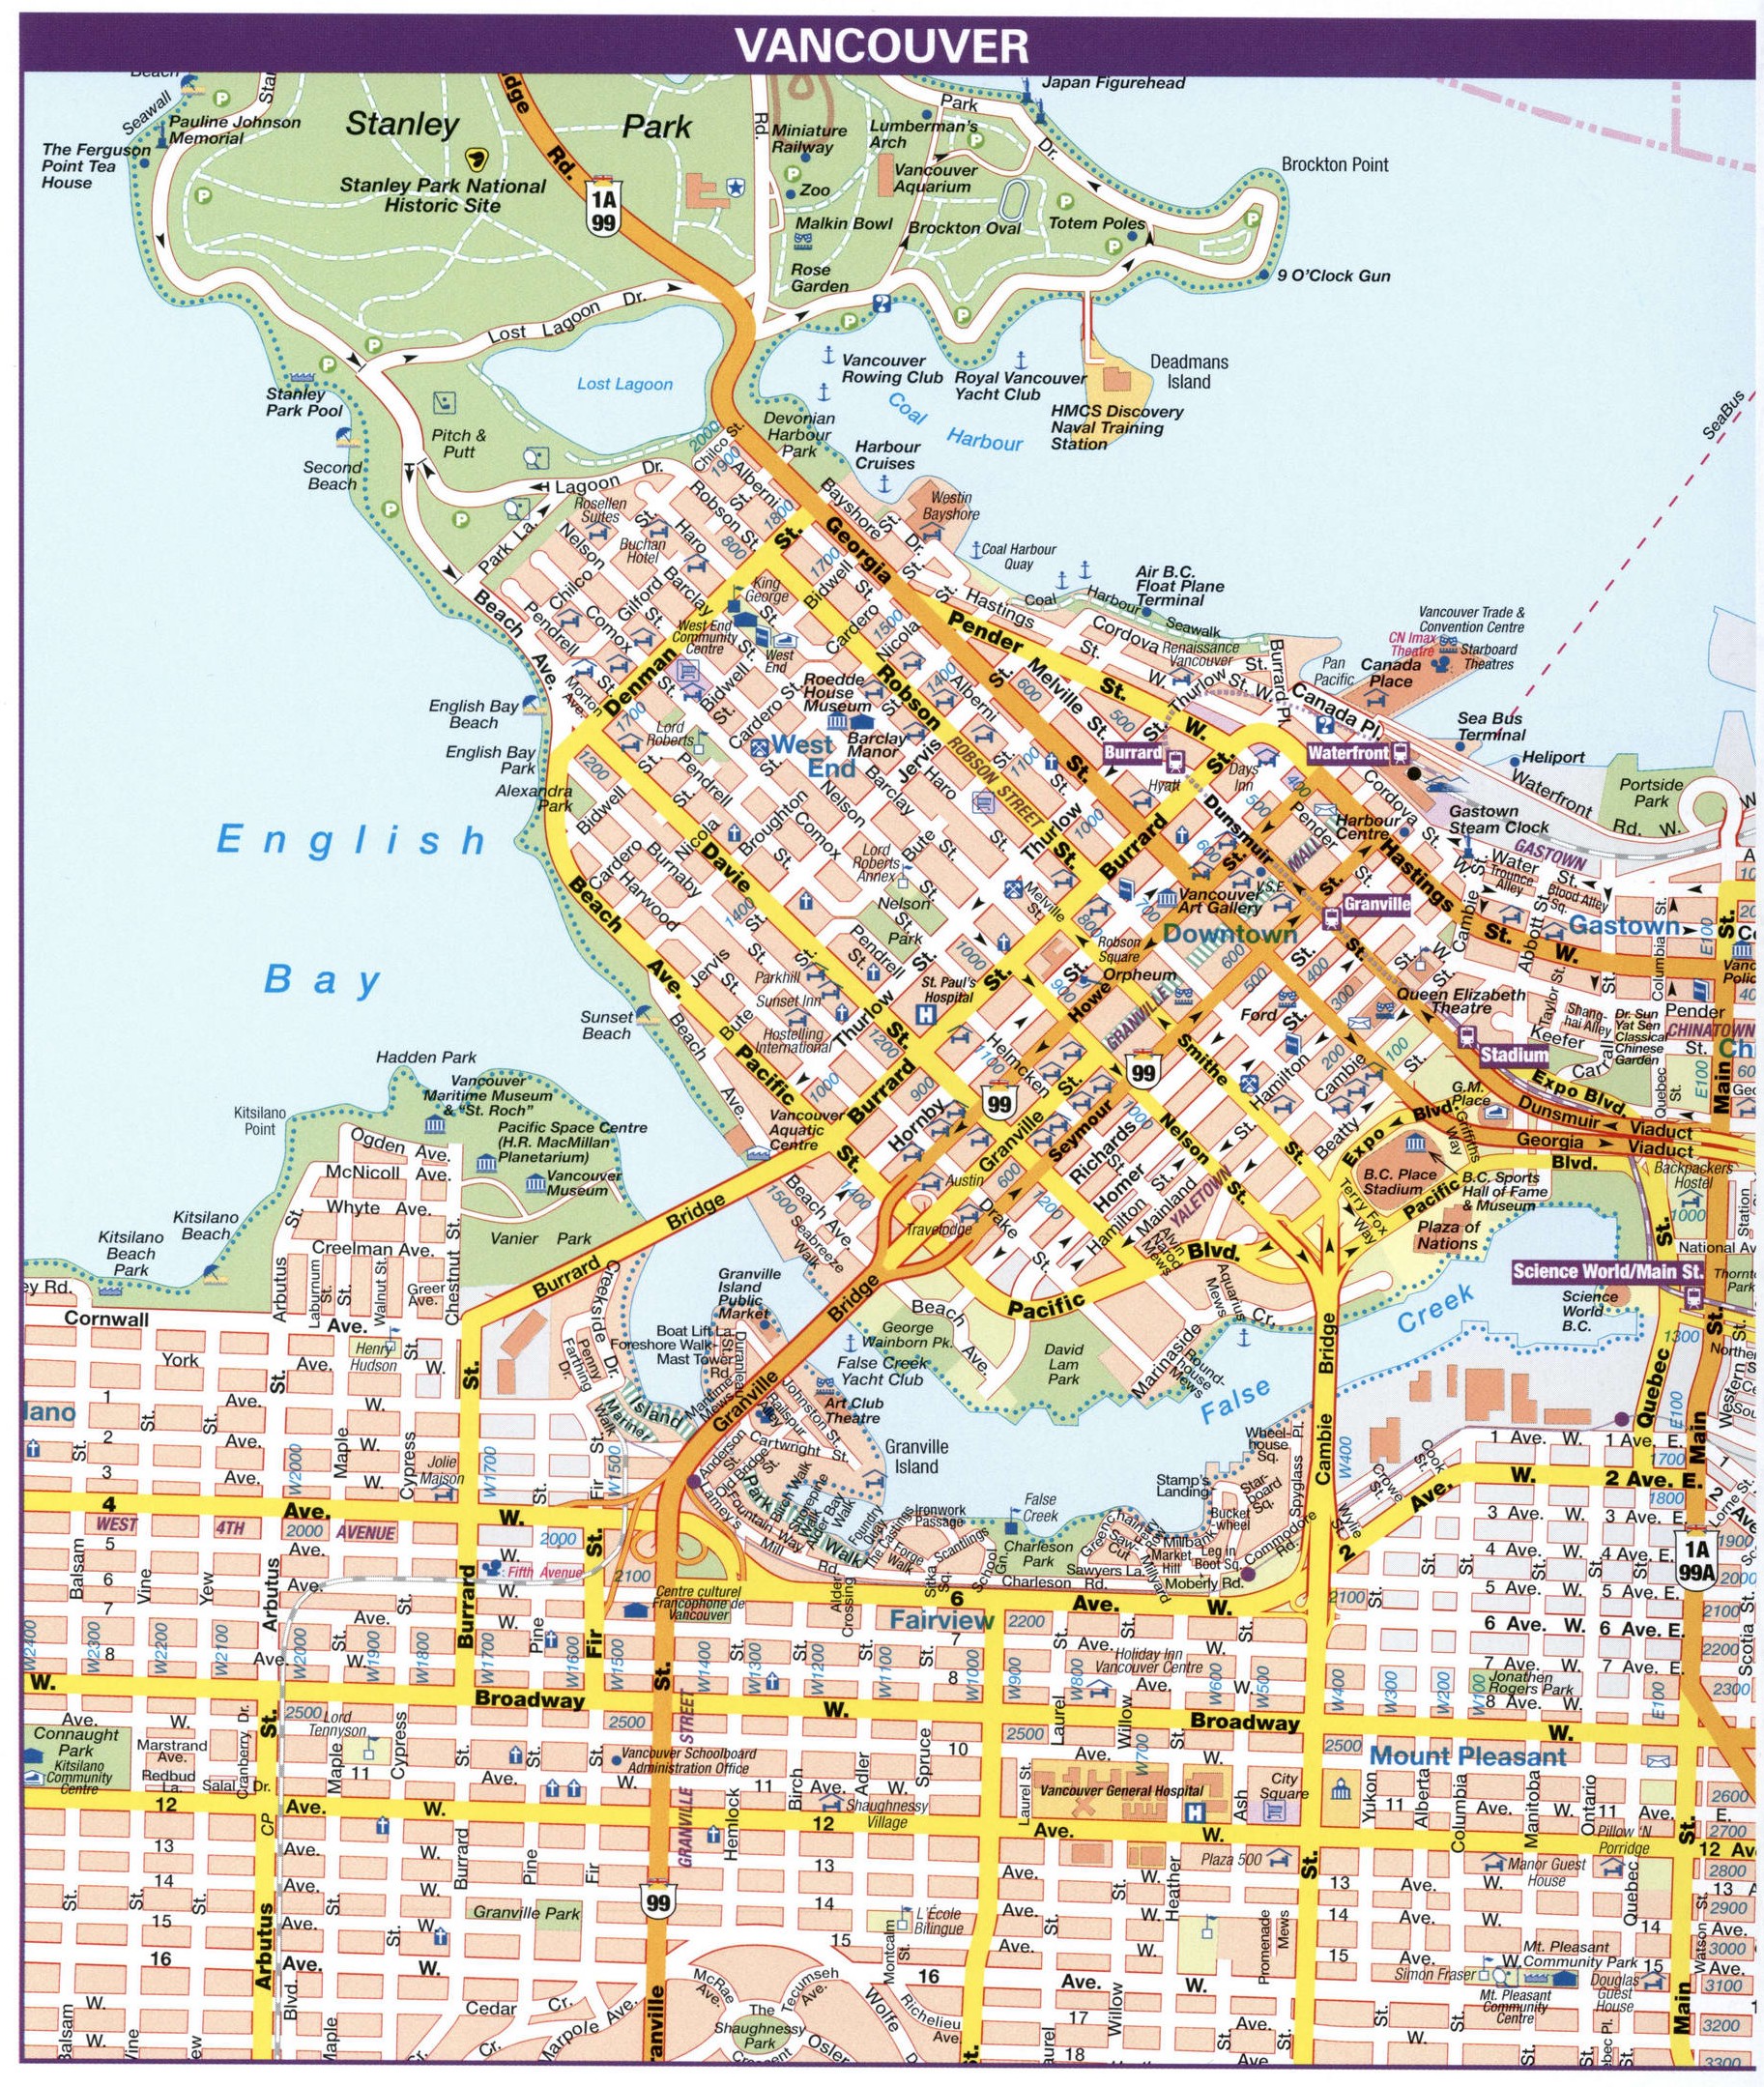 Vancouver road map